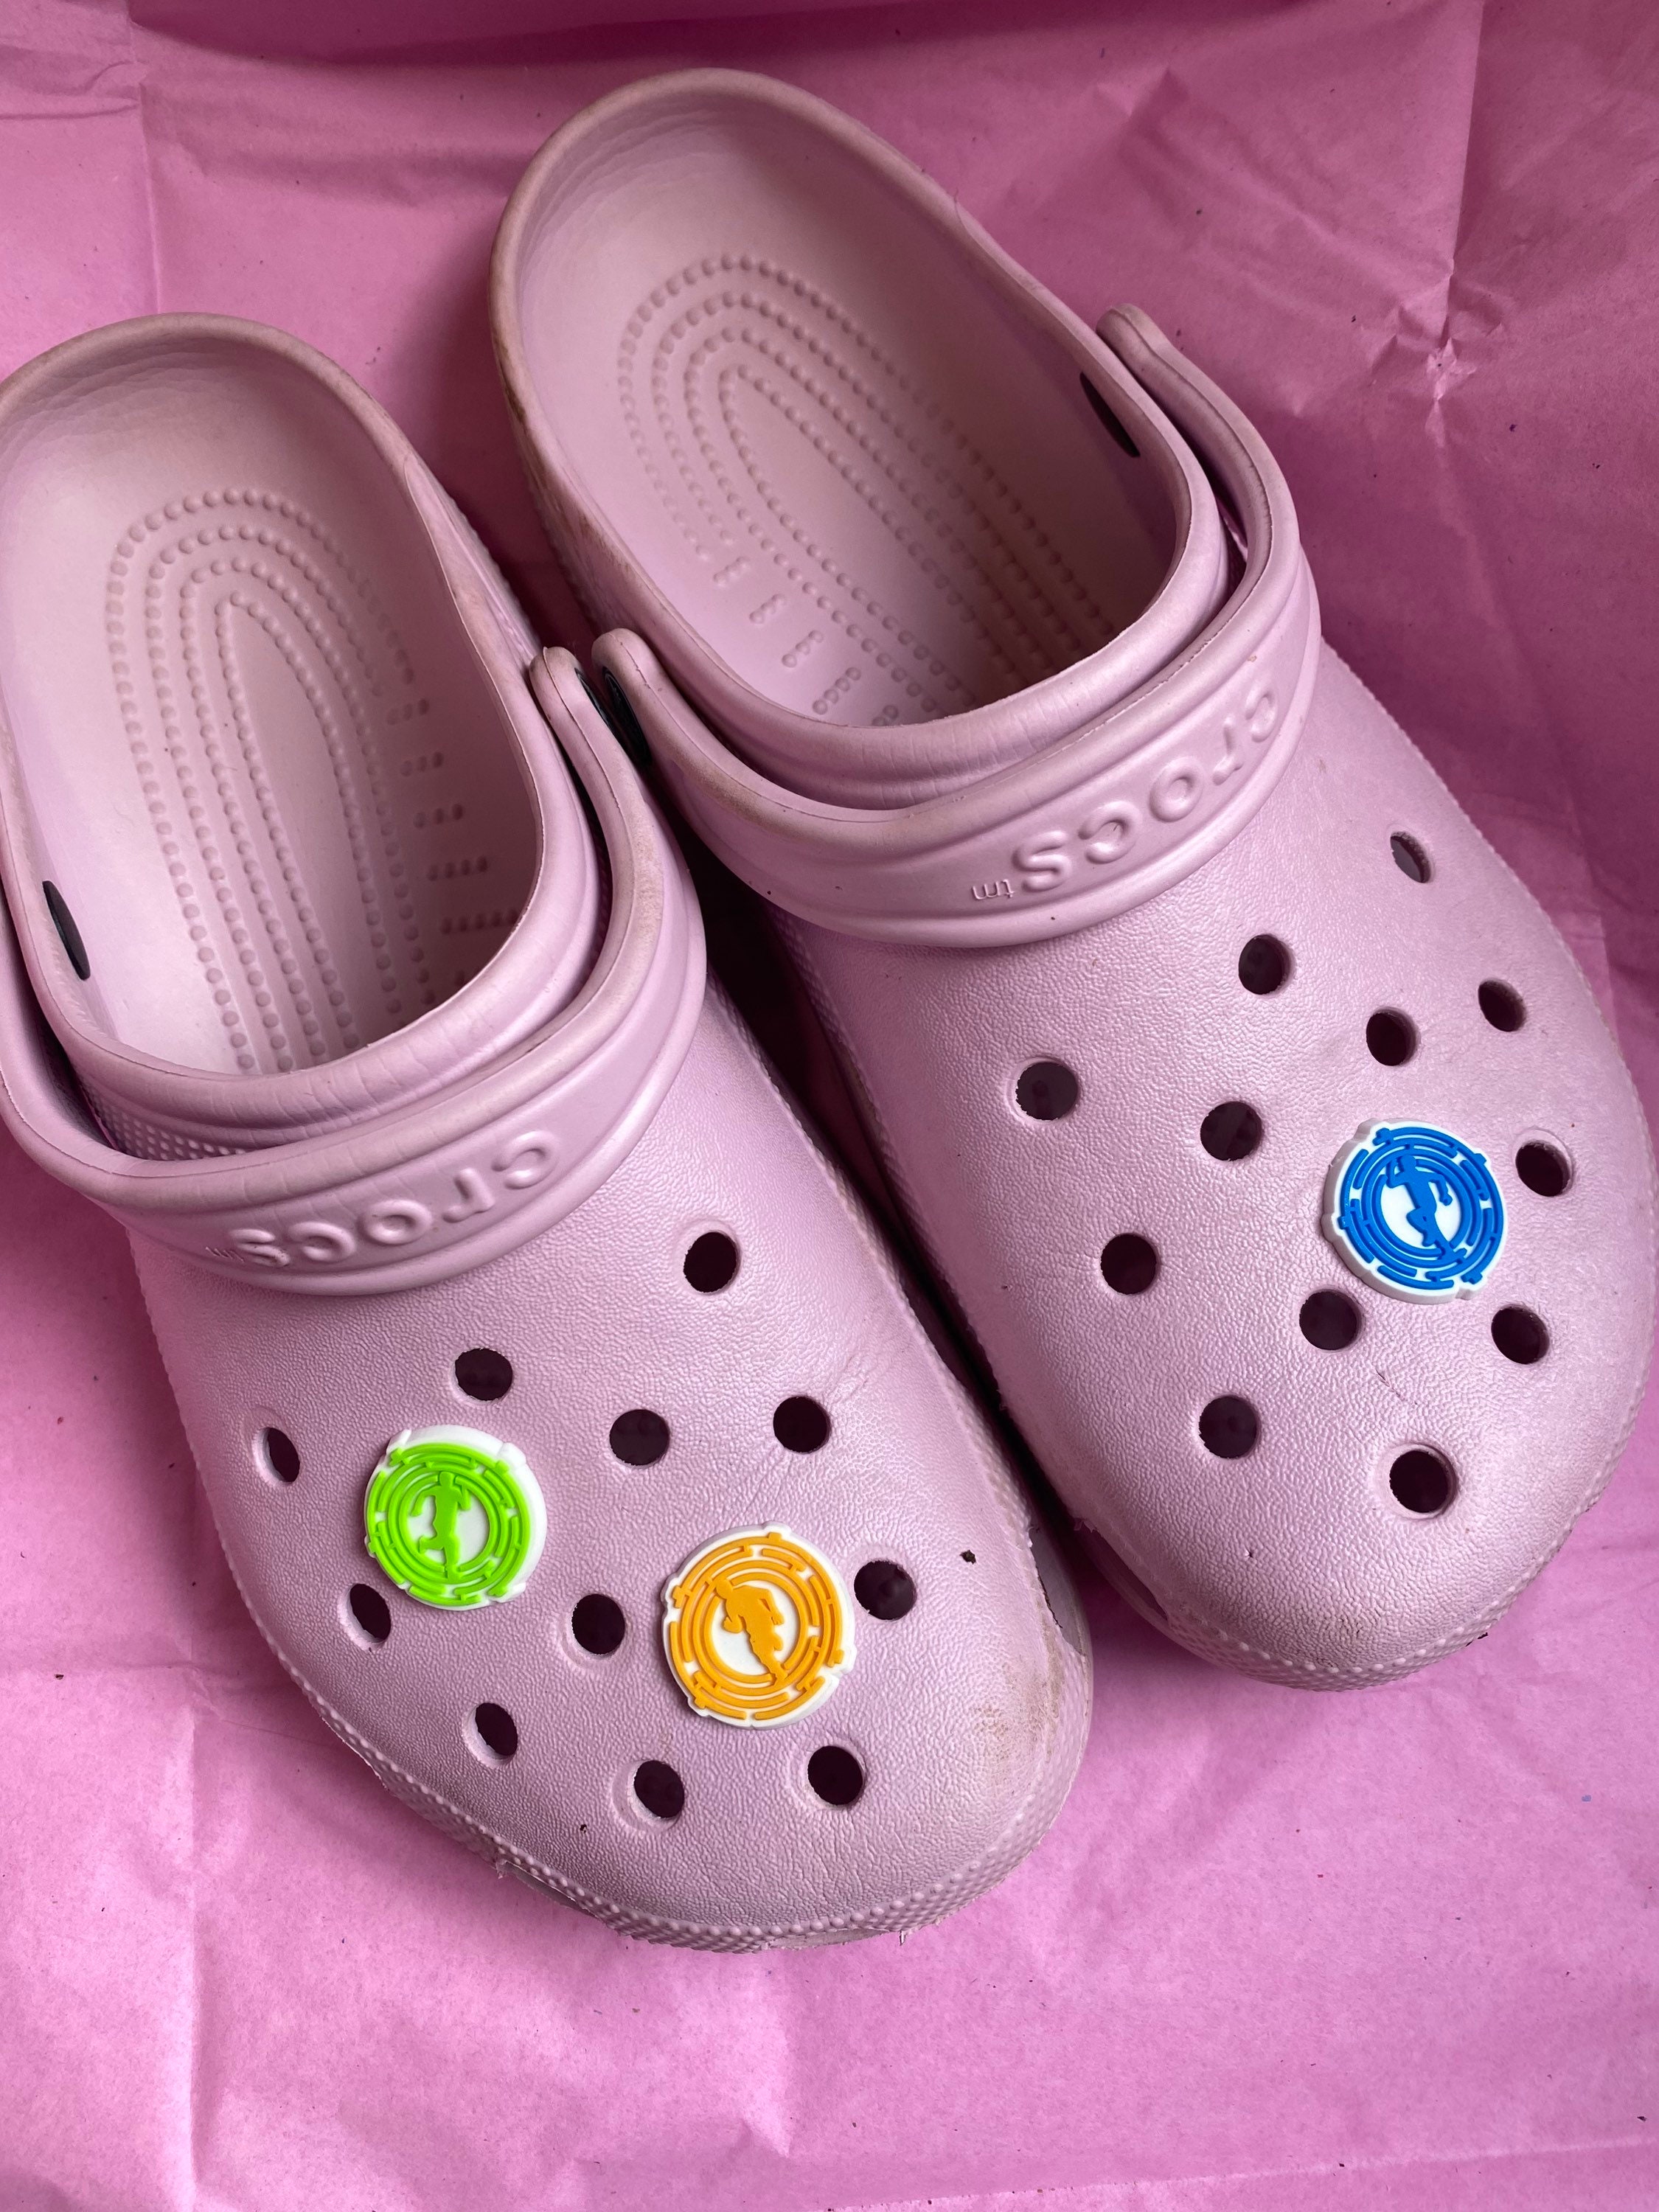 Just made these Jibbitz for a work project. Of course I had to buy the  perfect pair to go with them! What do you think? : r/crocs